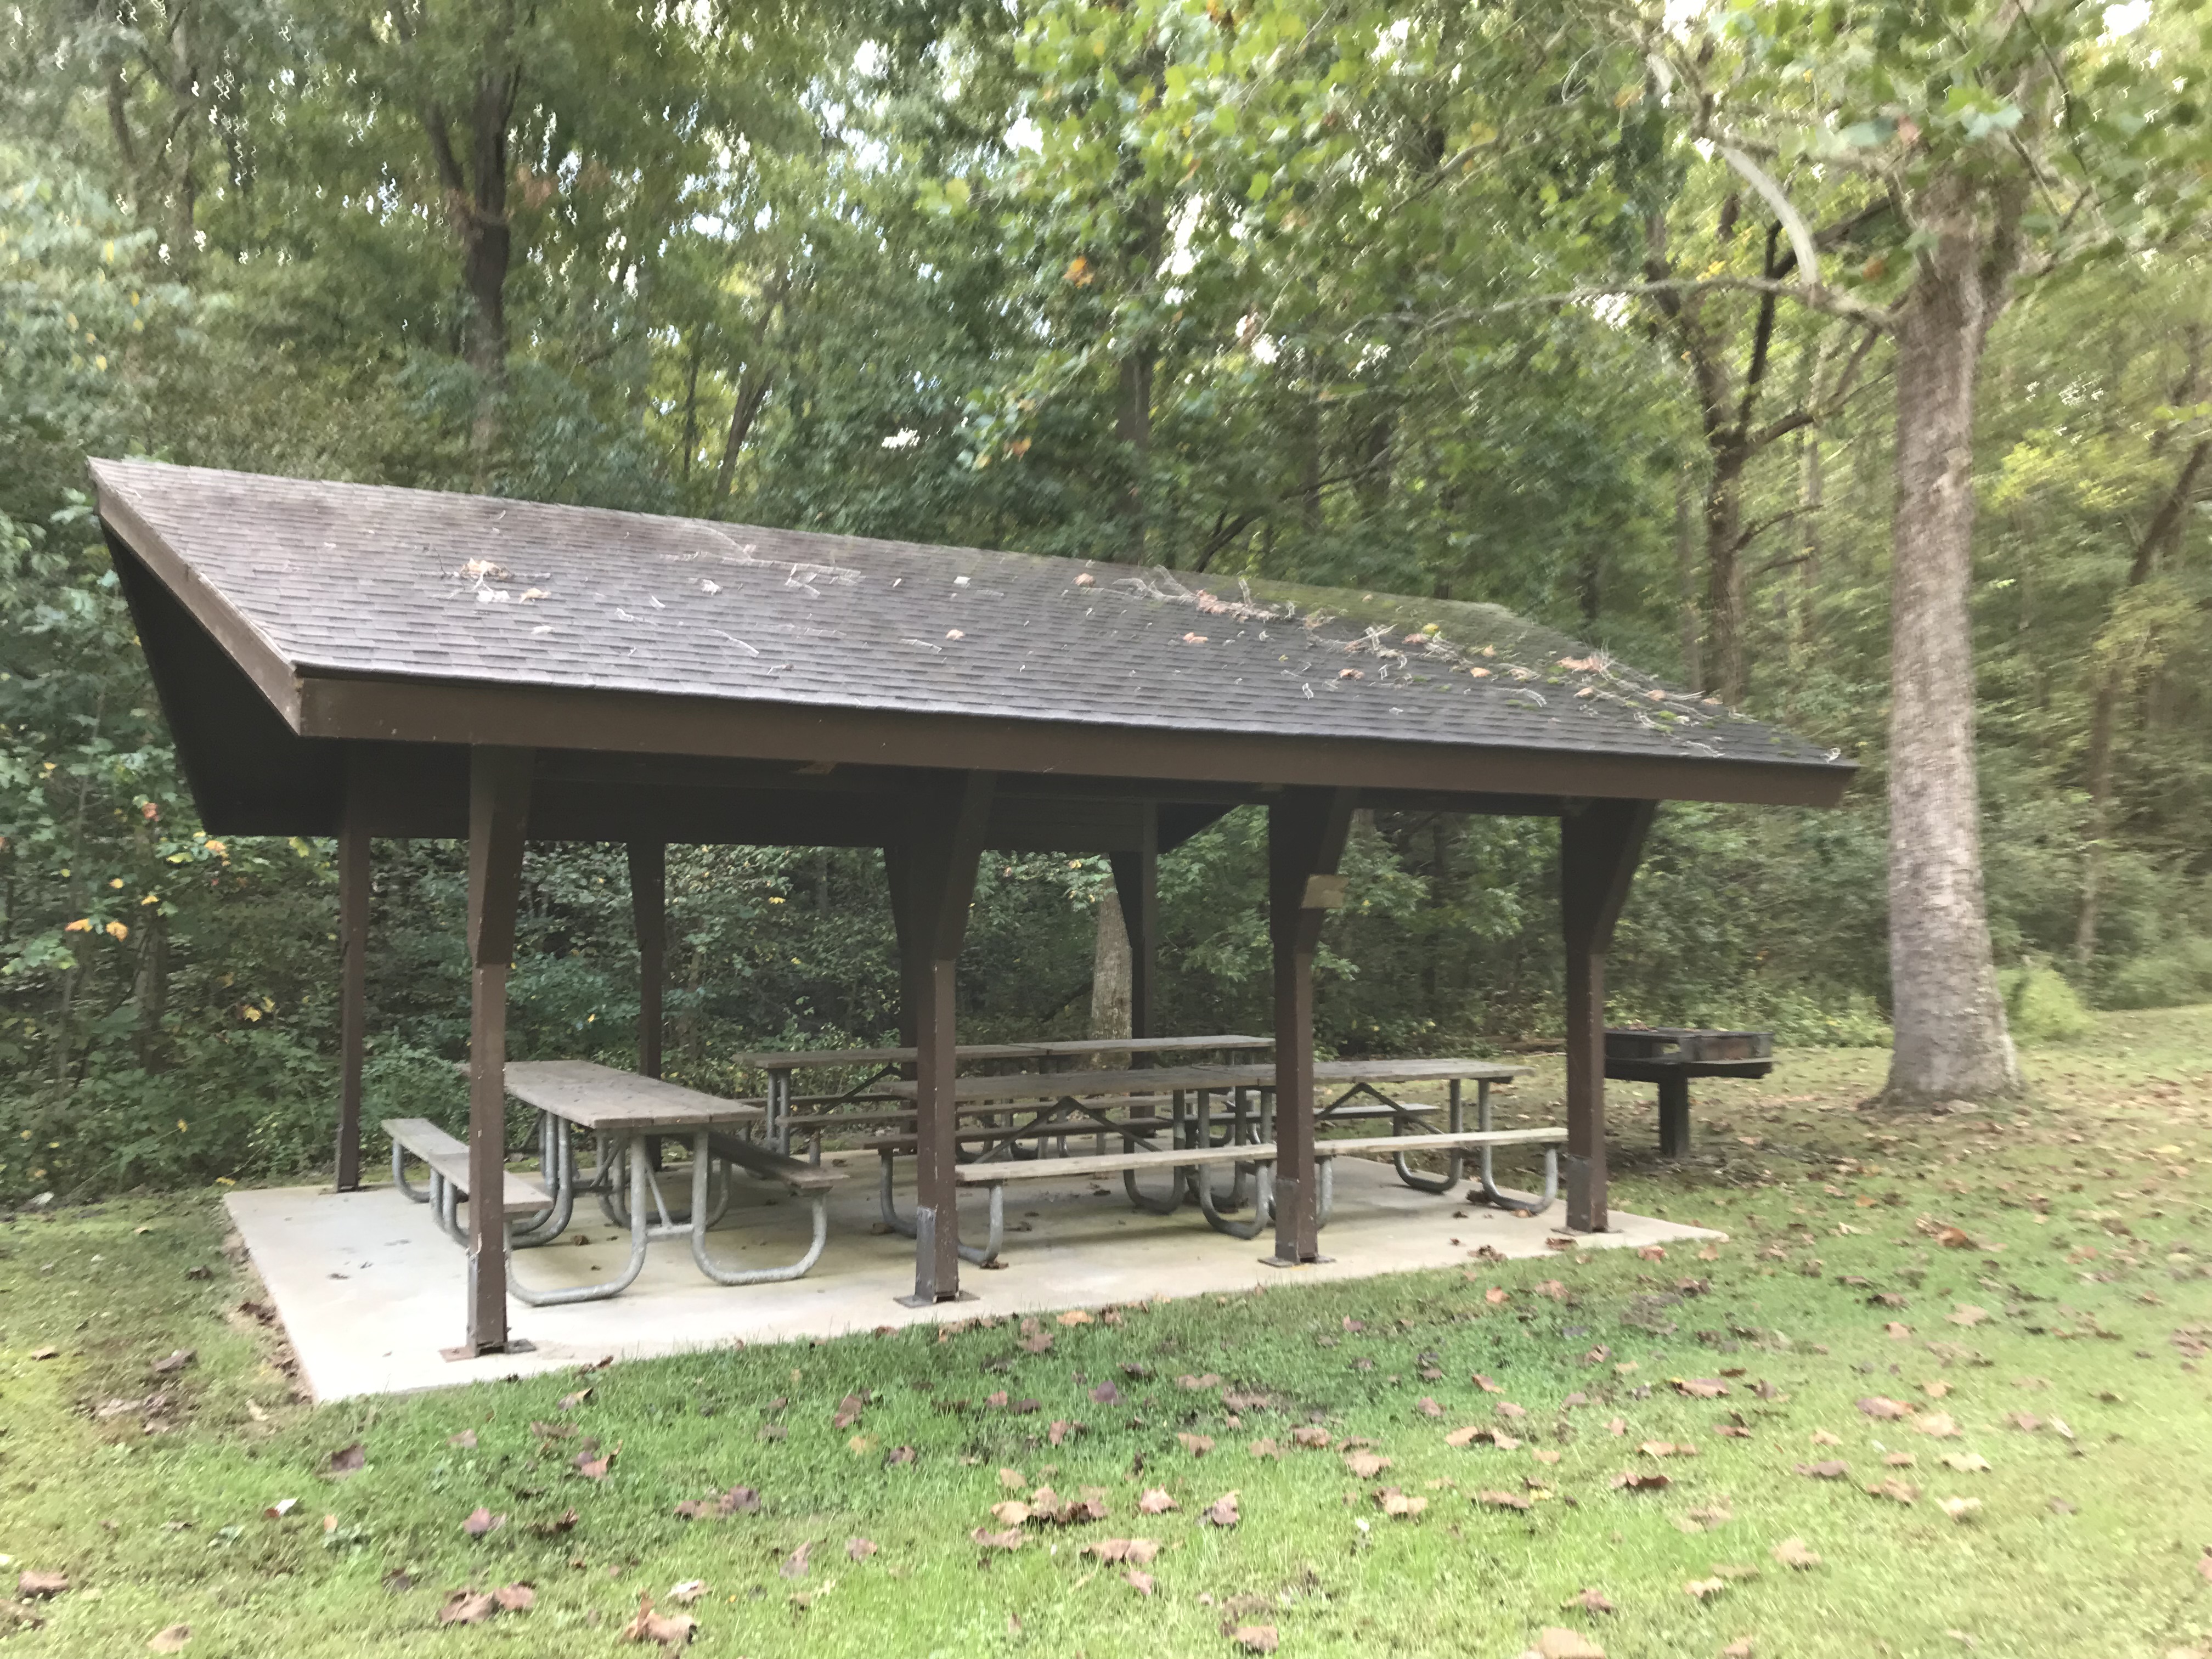 Side view of the small picnic shelter, nestled against a line of trees